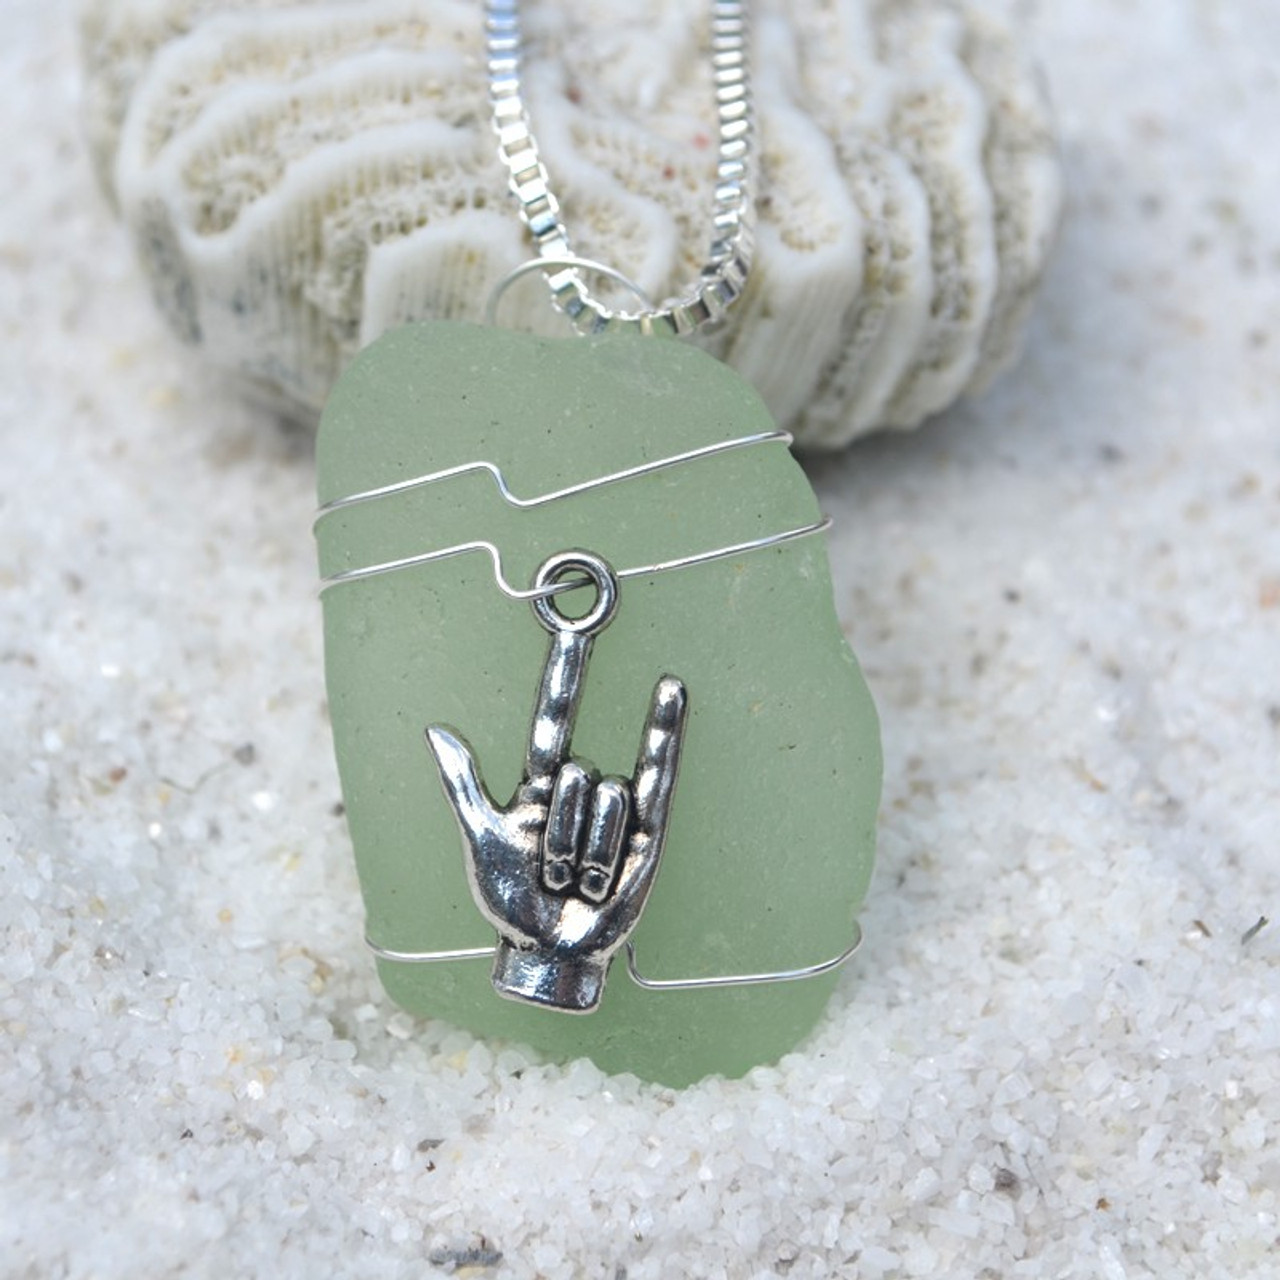 Love Jewelry: ASL Sign Language Necklace - Handmade in USA – Kpughdesigns